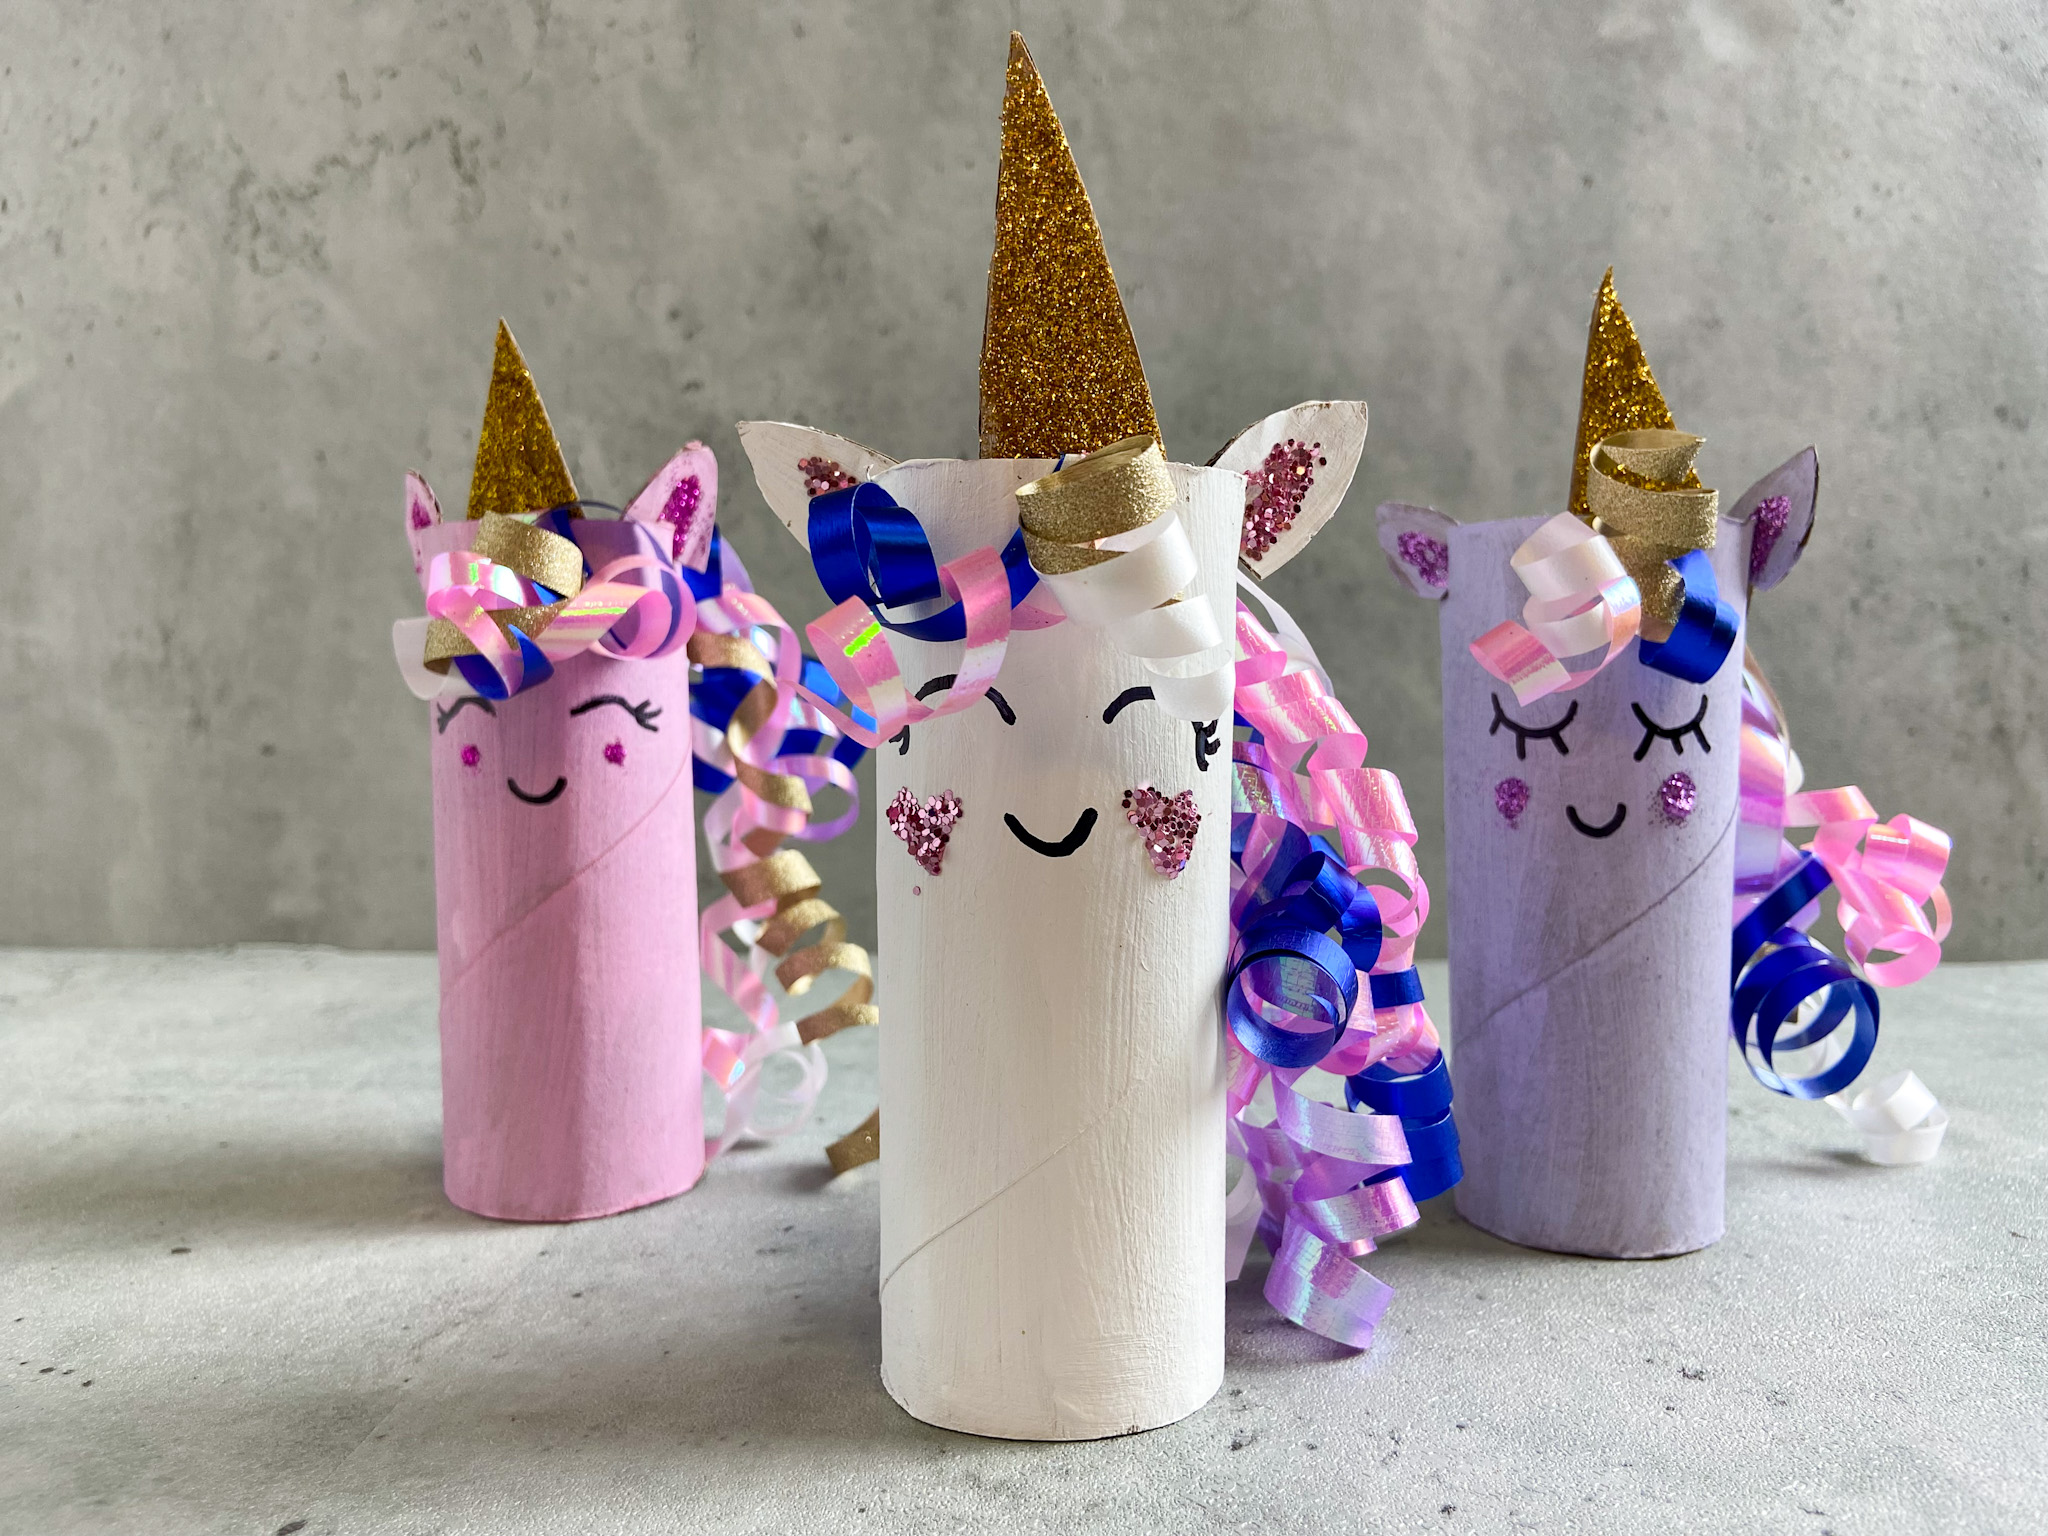 Free Printable Build a Unicorn Craft for Kids